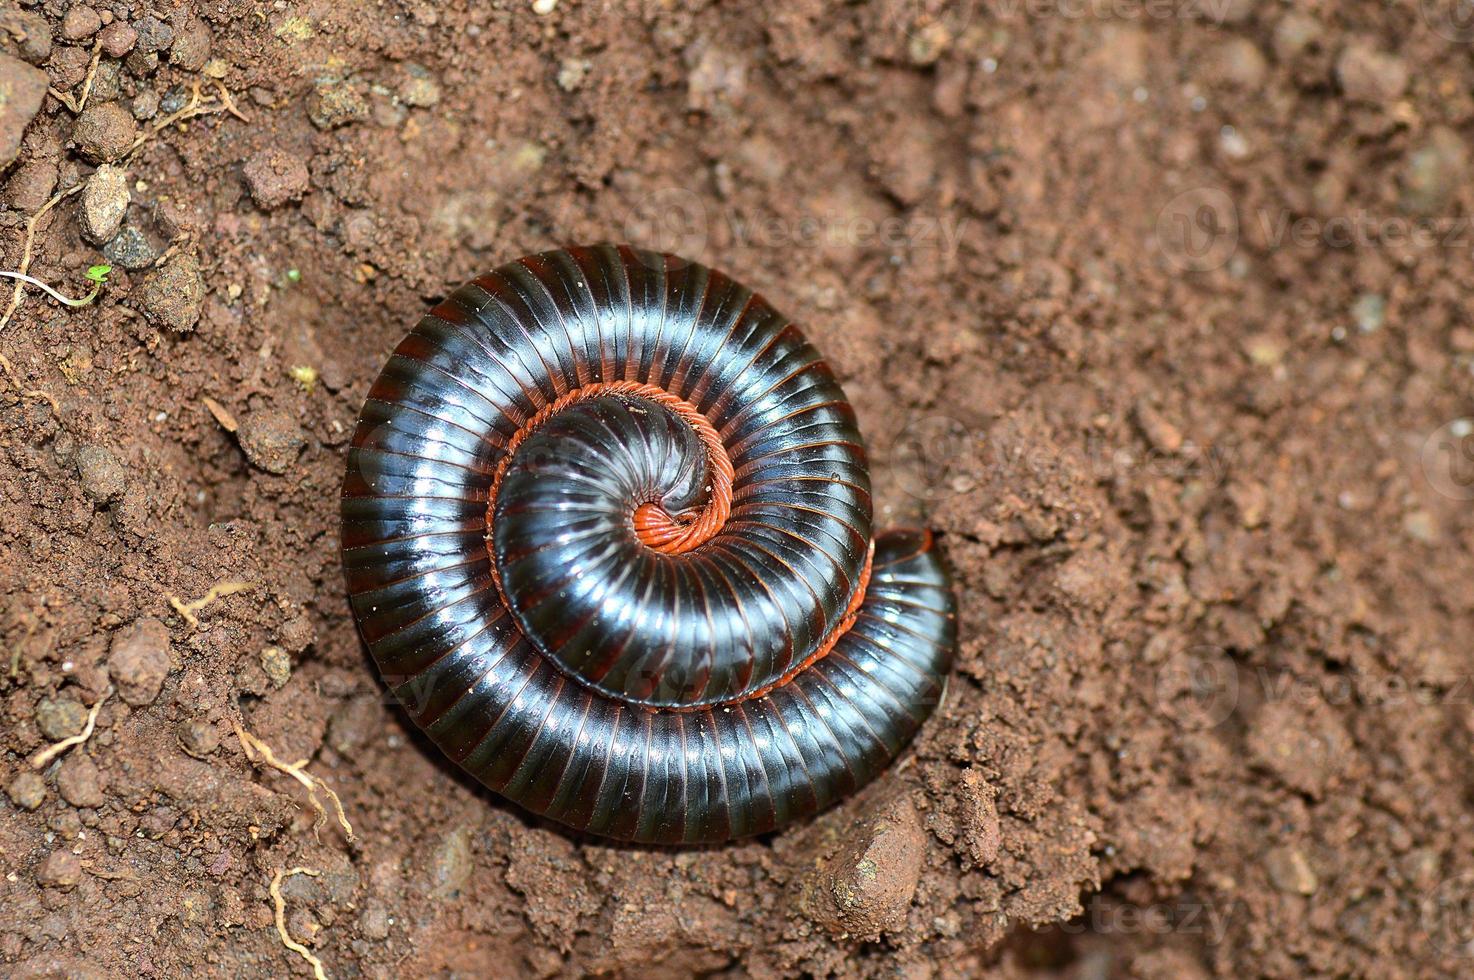 Millipede curl up in rainy day photo